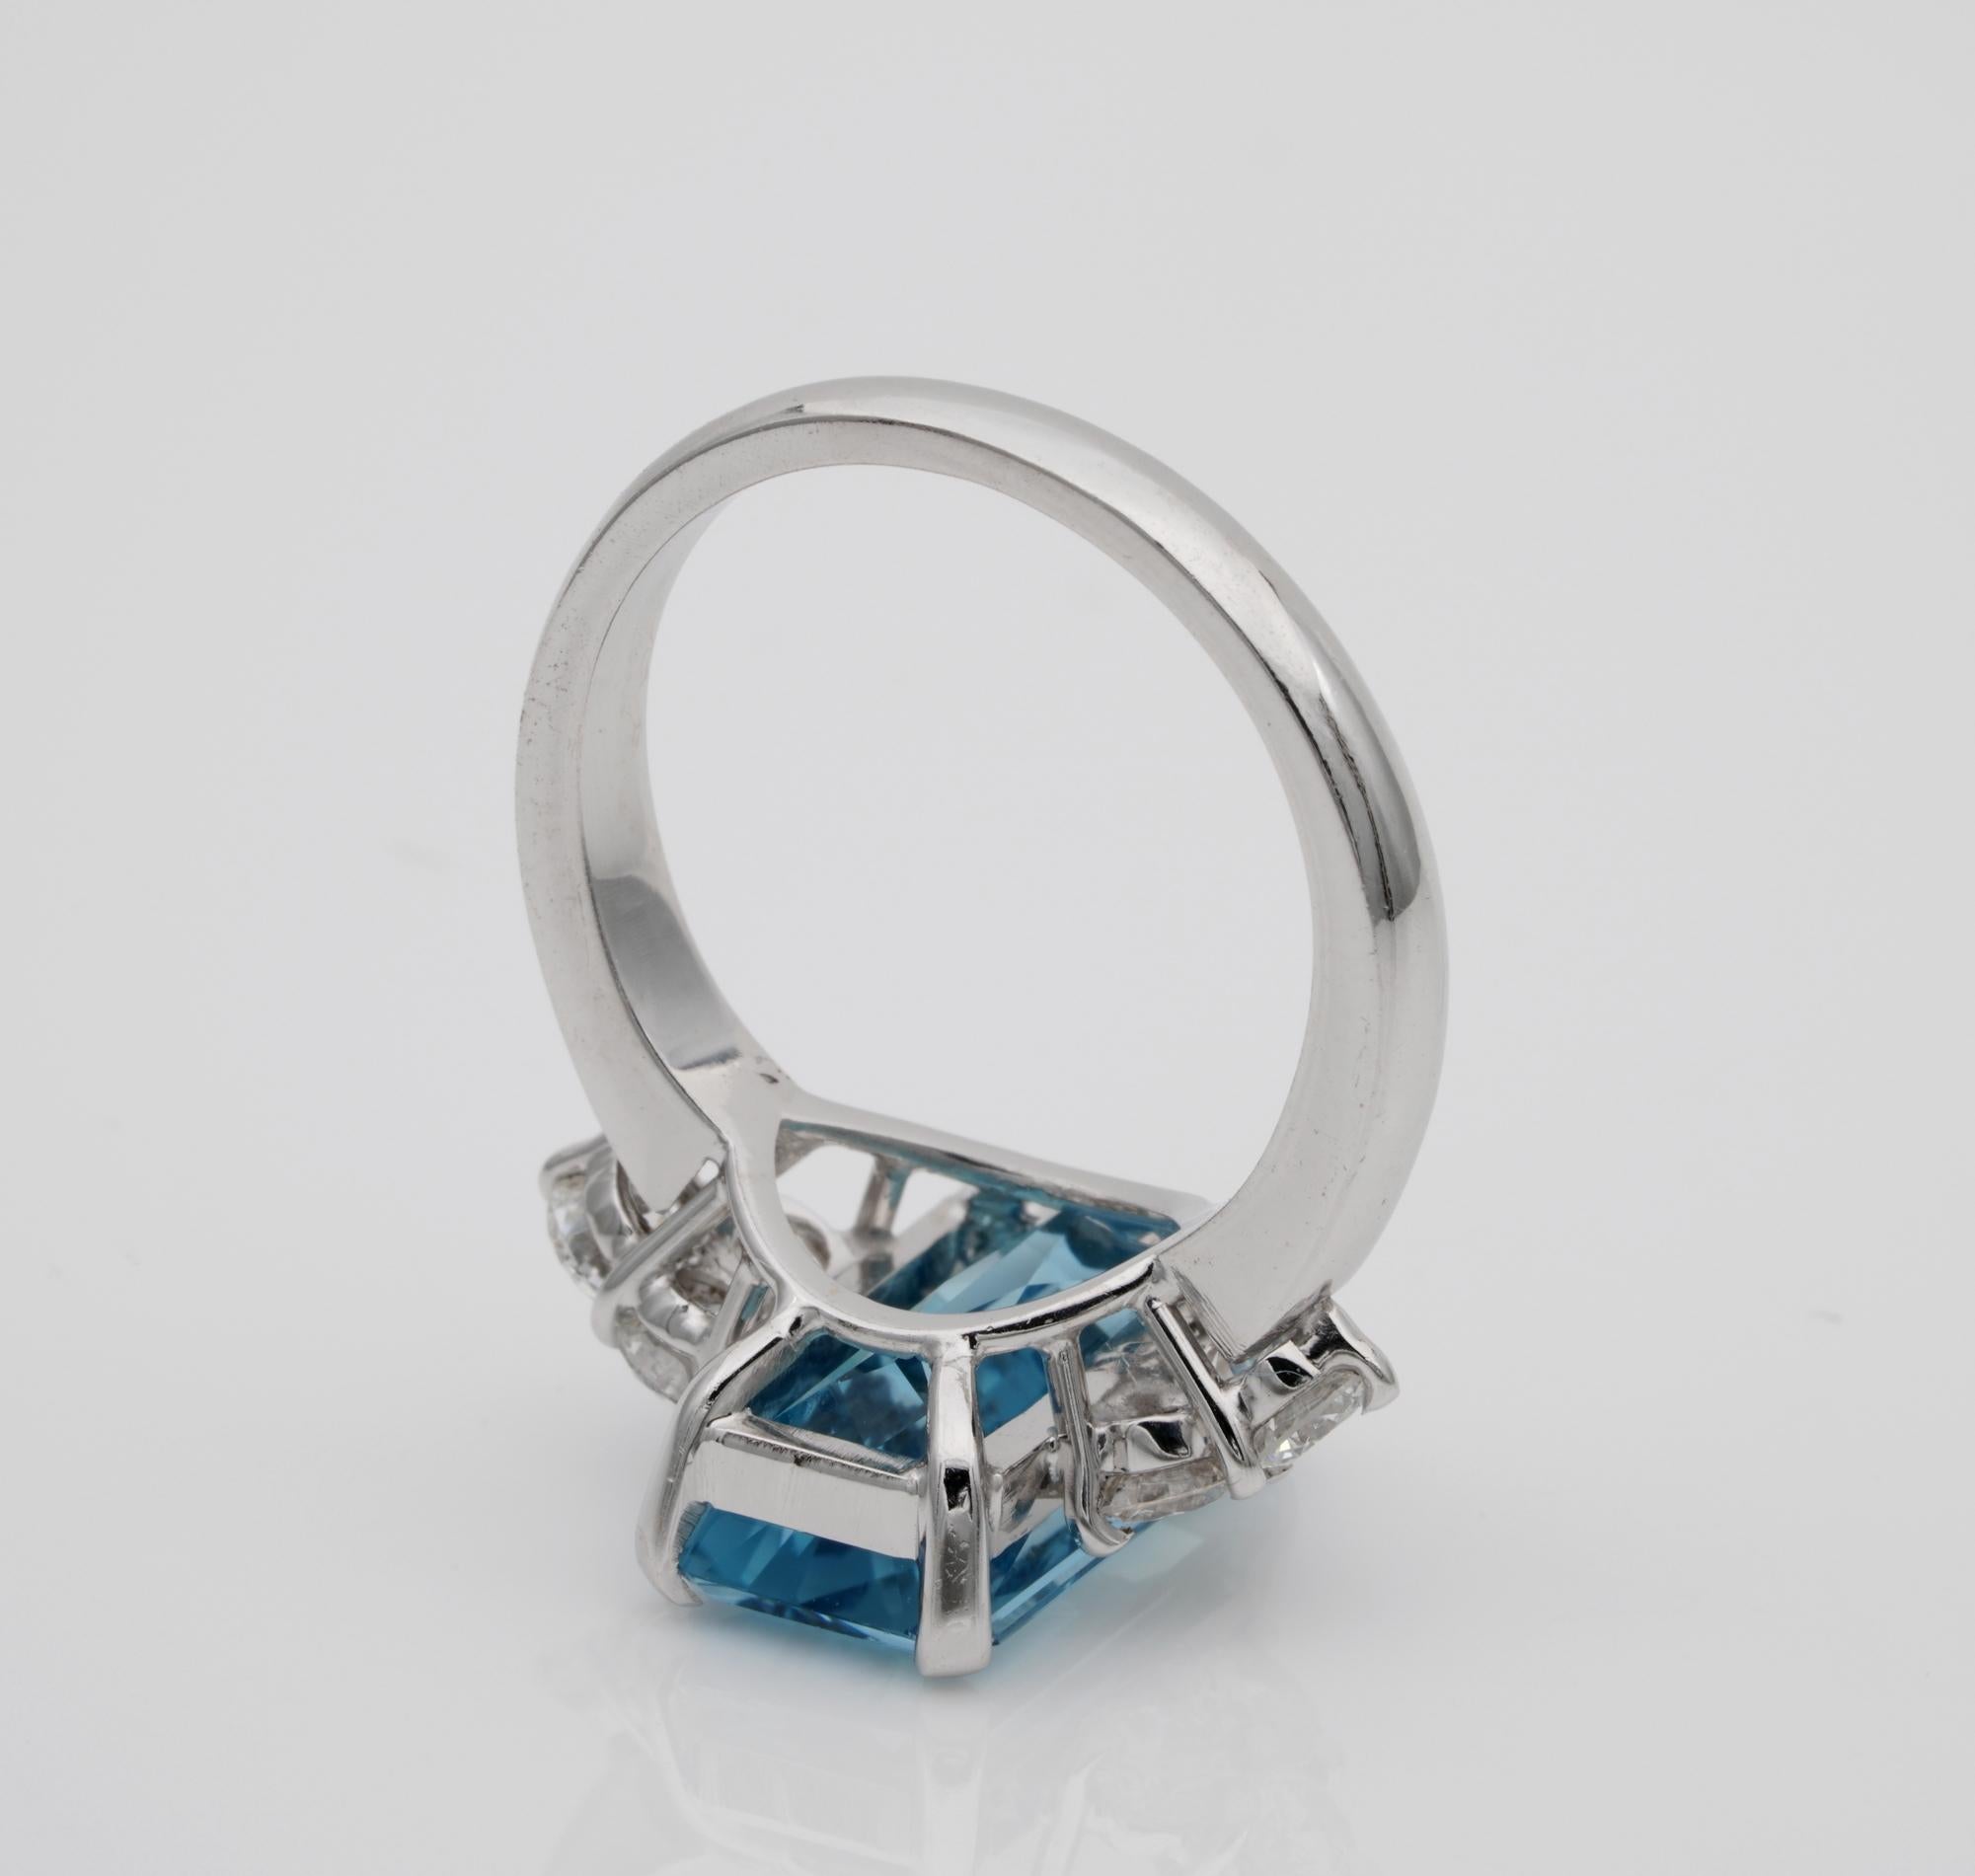 Magnificent 4.70 Carat Aquamarine and Diamond High Quality Engagement Ring For Sale 1